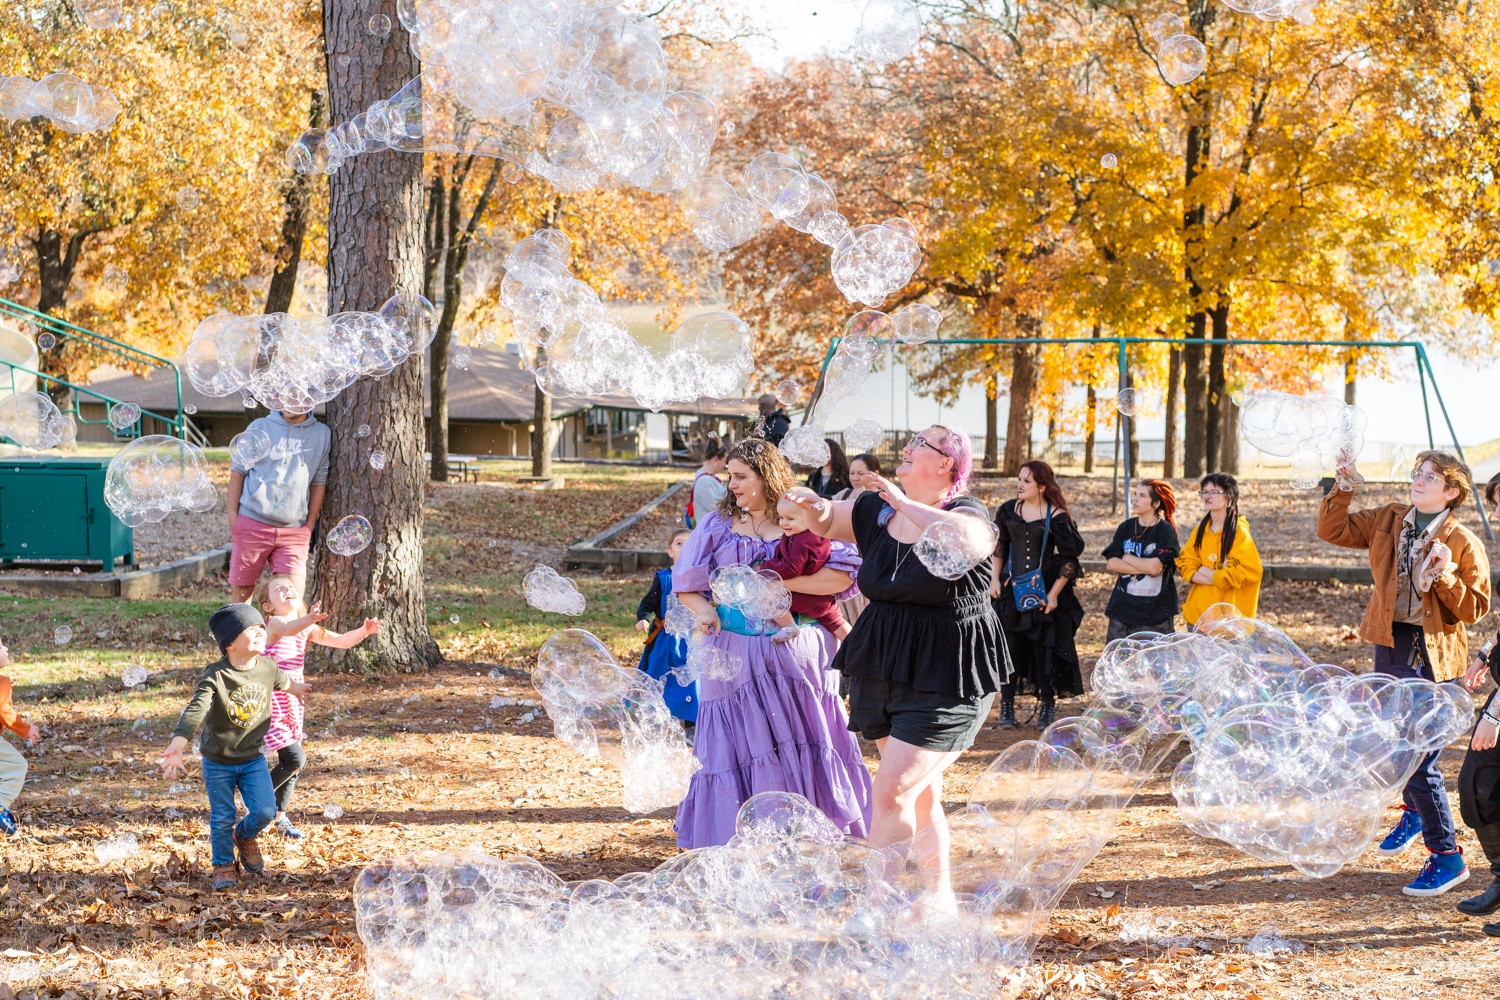 Cosplayers and children chase after large multicolored bubbles in a park in autumn at the Arkansas Renaissance Festival.